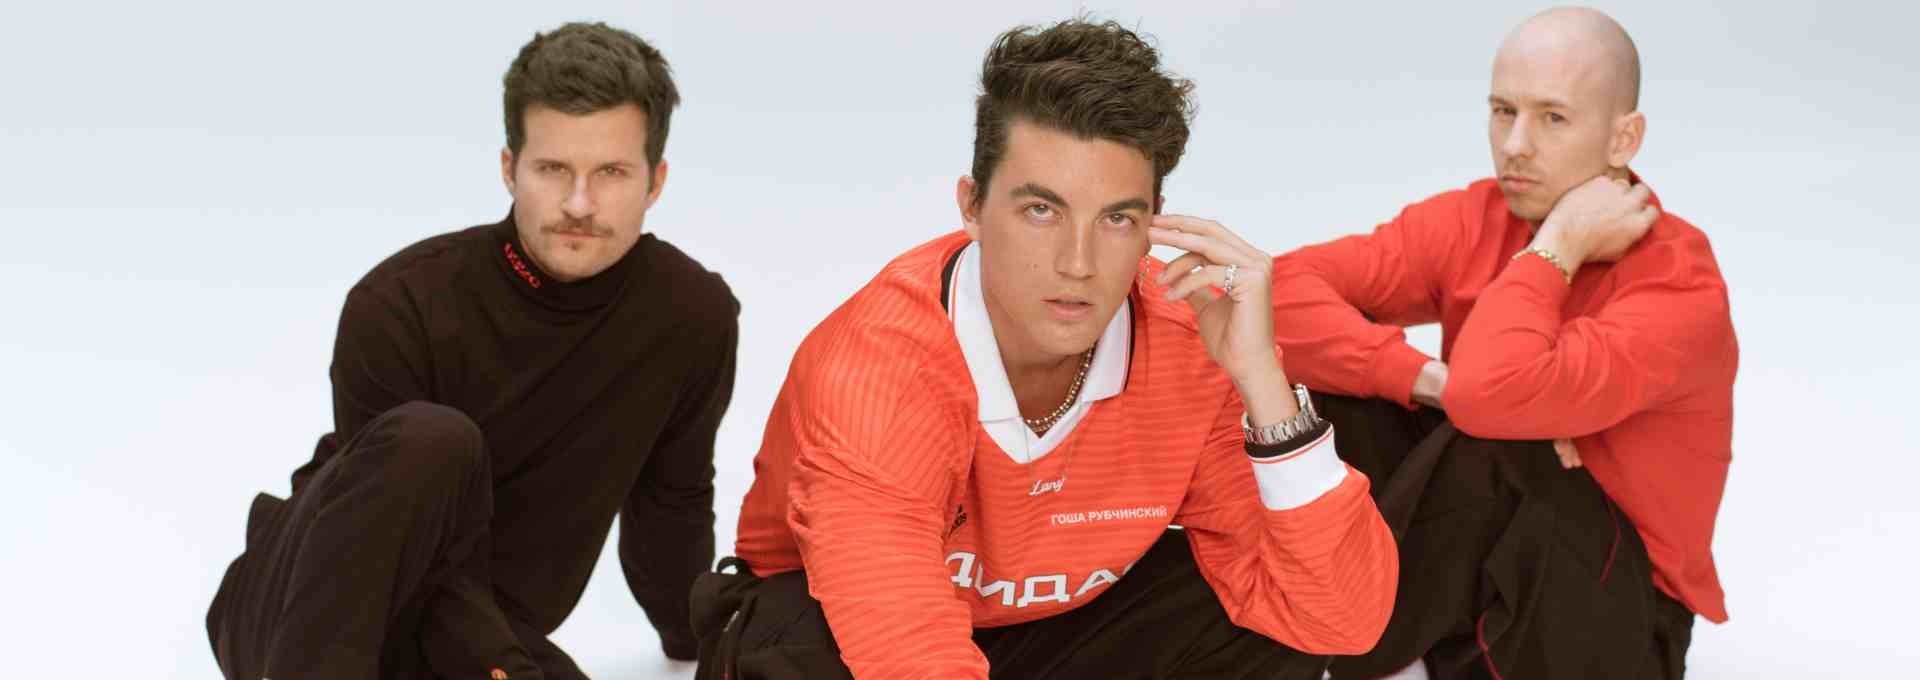 "It really feels like we're at the edge of something bigger every time we come to Asia": An interview with Les Priest and Jake Goss of LANY